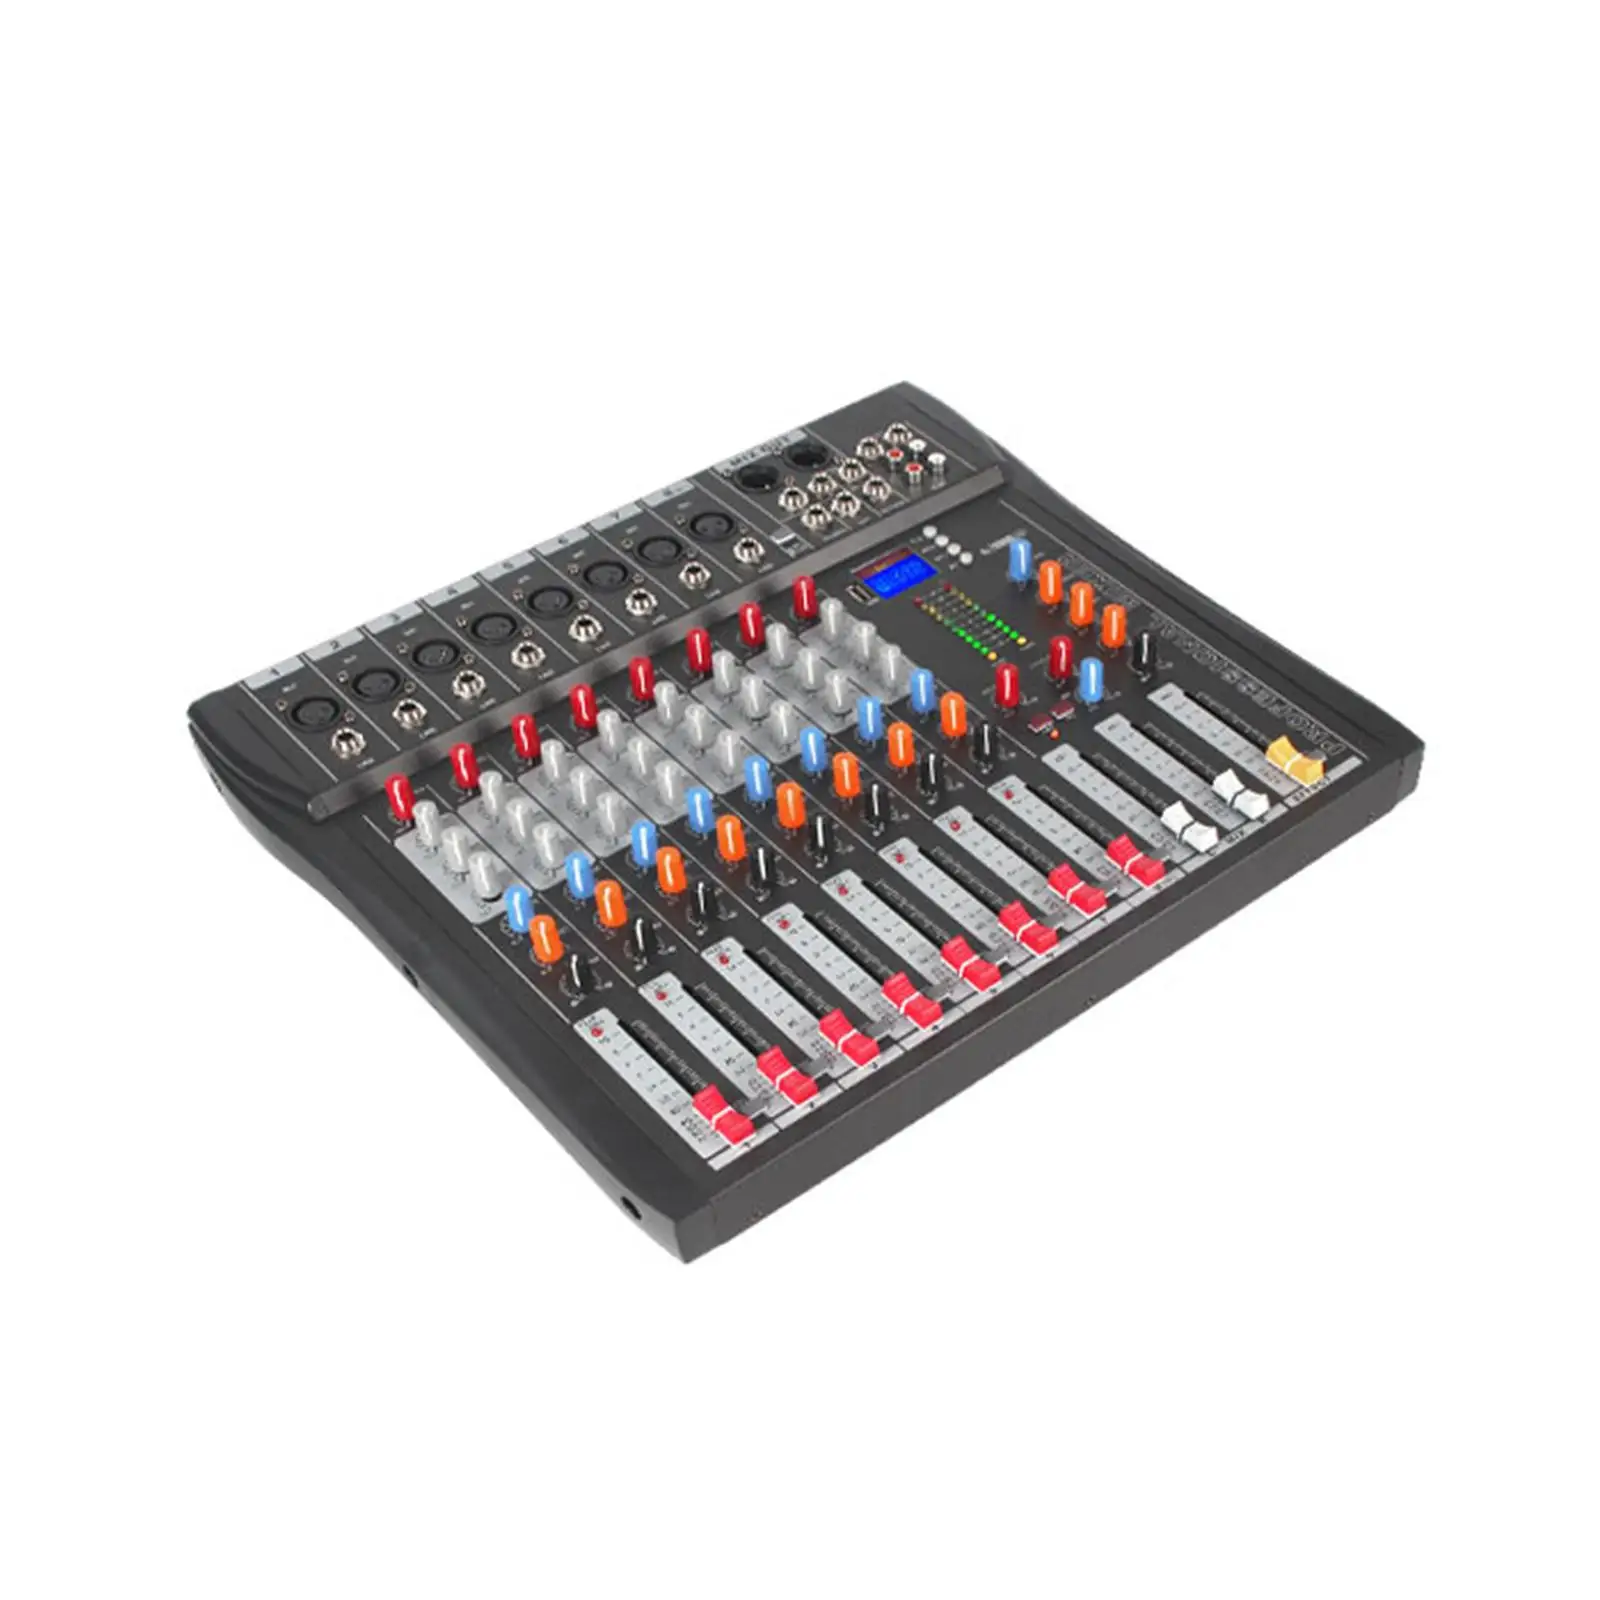 8 Channel Mixer Sound Mixing Console EU Adapter for Karaoke Multi Inputs and Outputs Impact Resistant Housing 48V Phantom Power